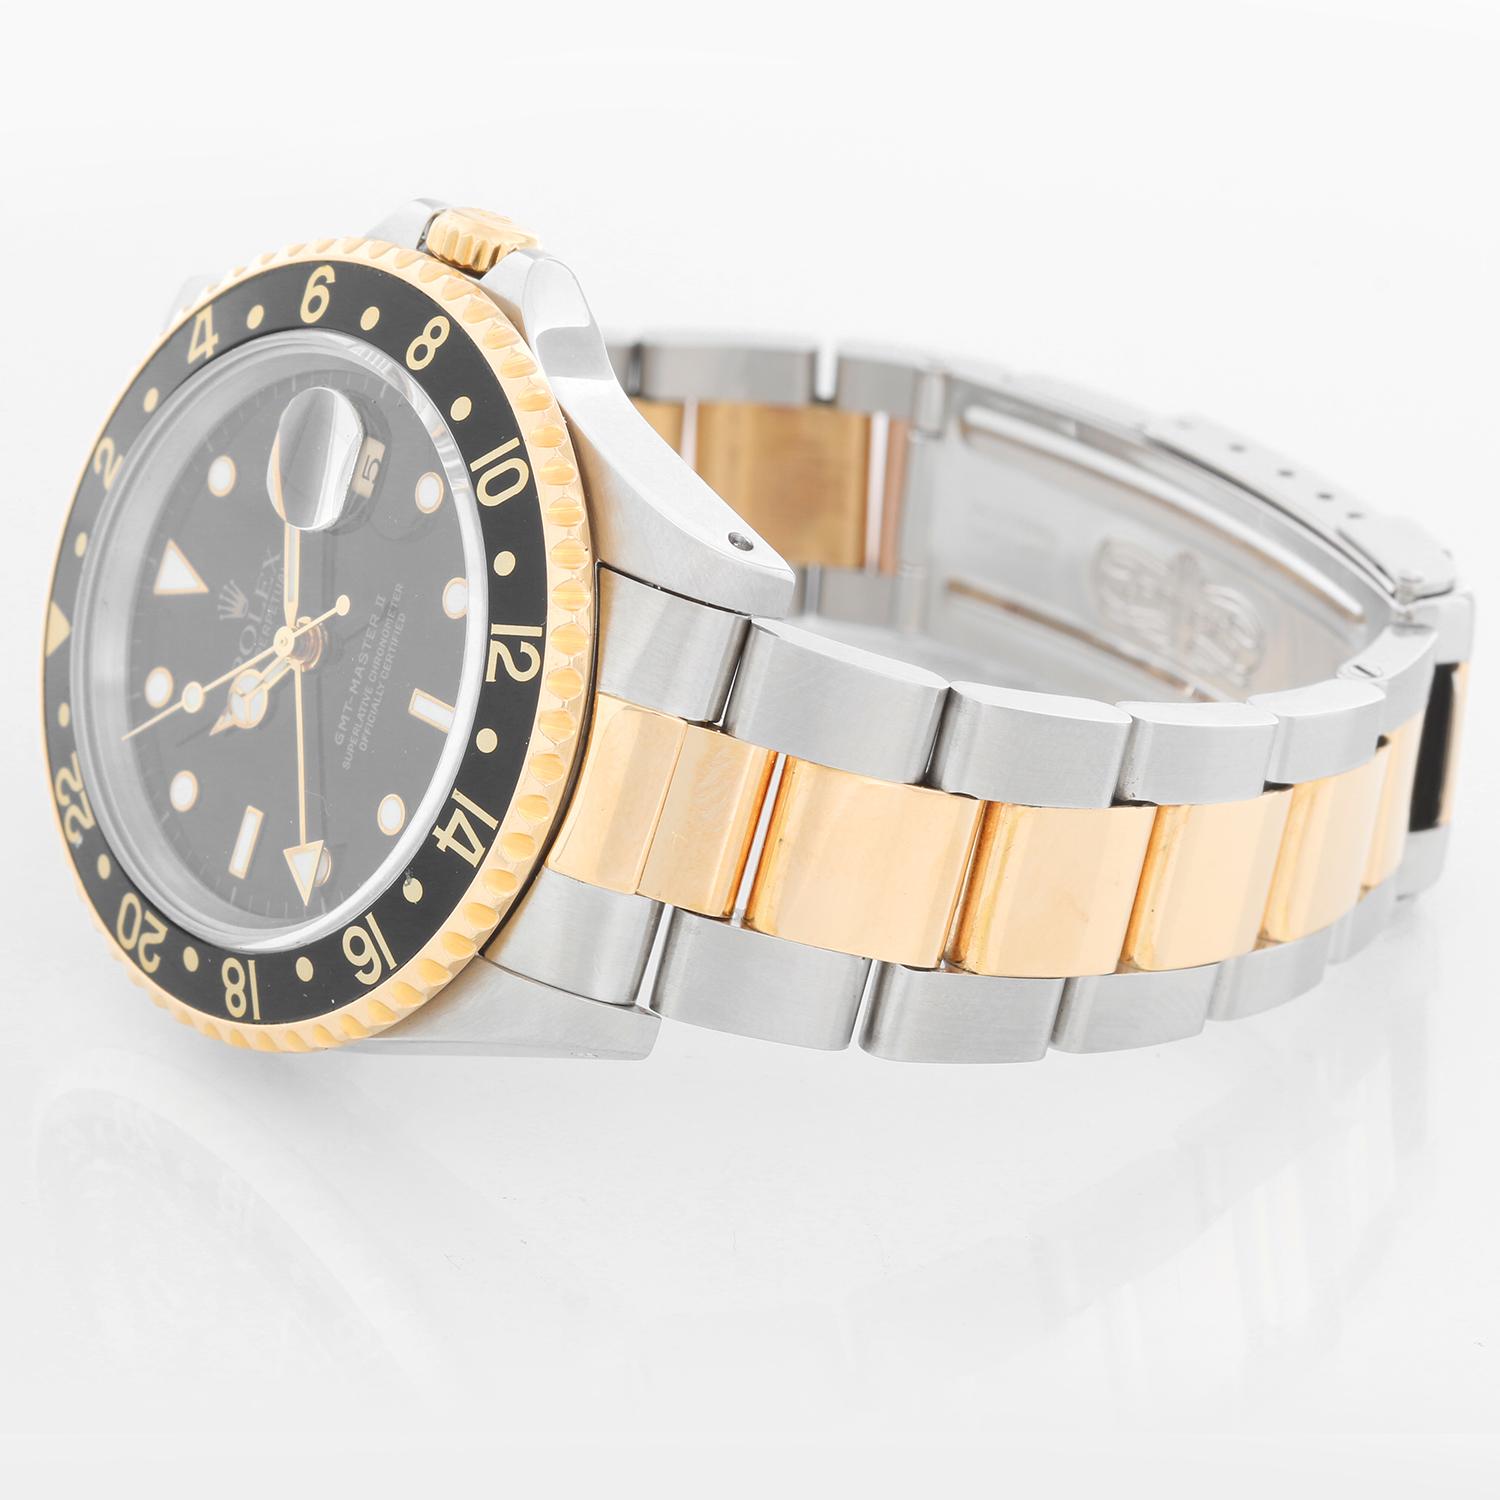 Men's Rolex GMT-Master II Watch 16713 - Automatic winding, 31 jewels, Quickset, sapphire crystal. Stainless steel with 18k yellow gold bezel with black insert. Black dial with luminous style markers. Stainless steel & 18k yellow gold Oyster